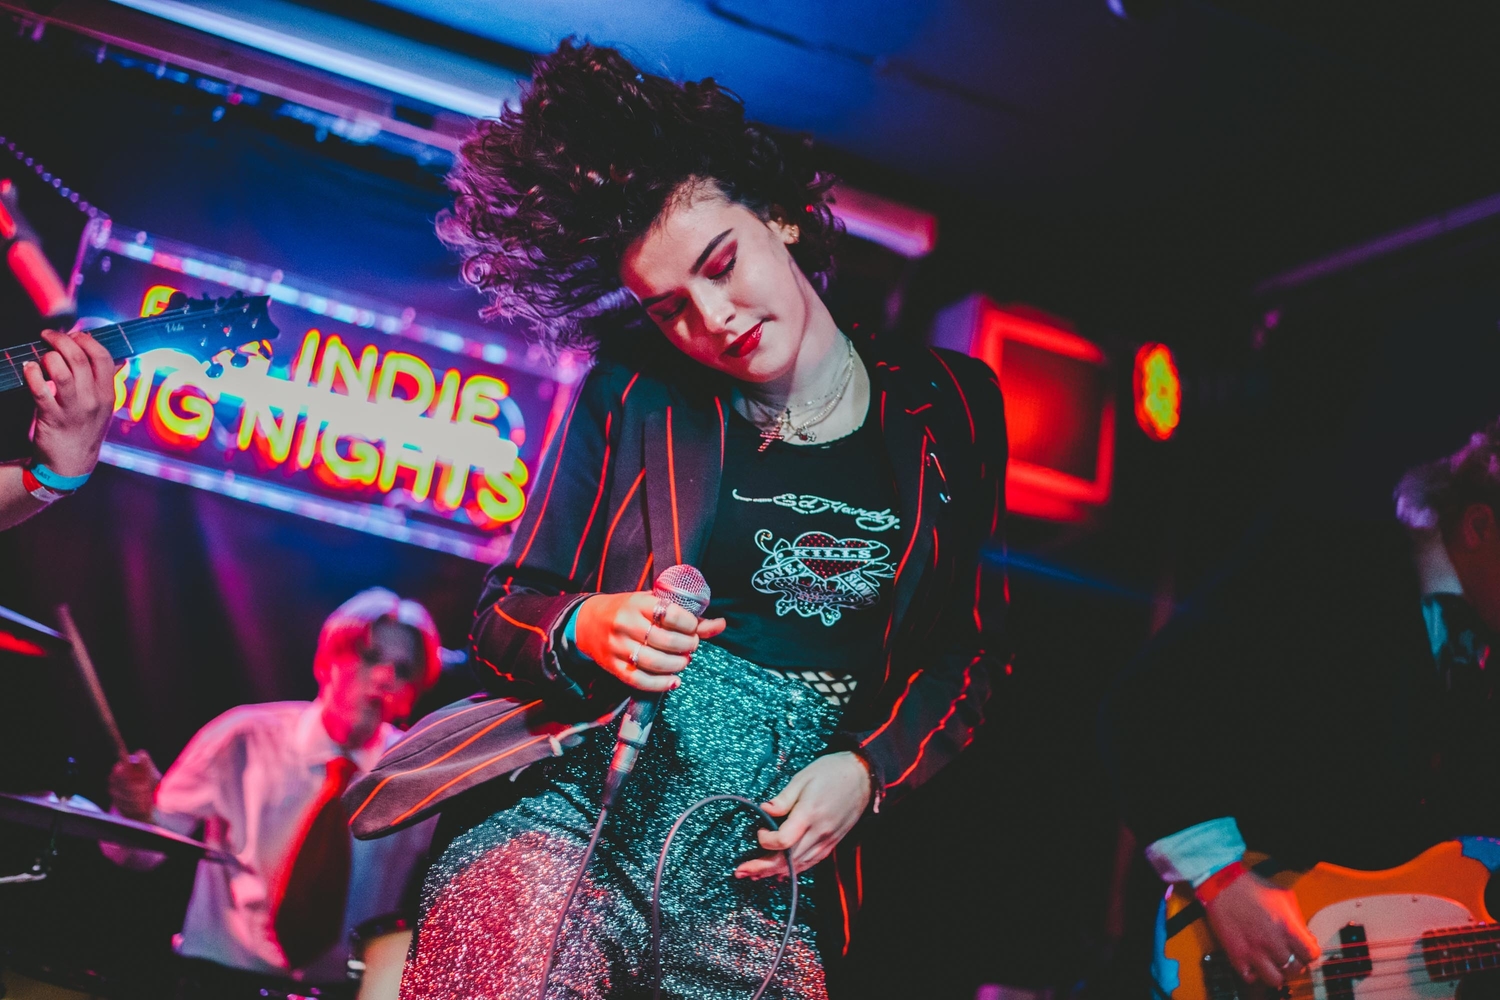 Big Indie Big Nights hits The Old Blue Last for festive celebrations